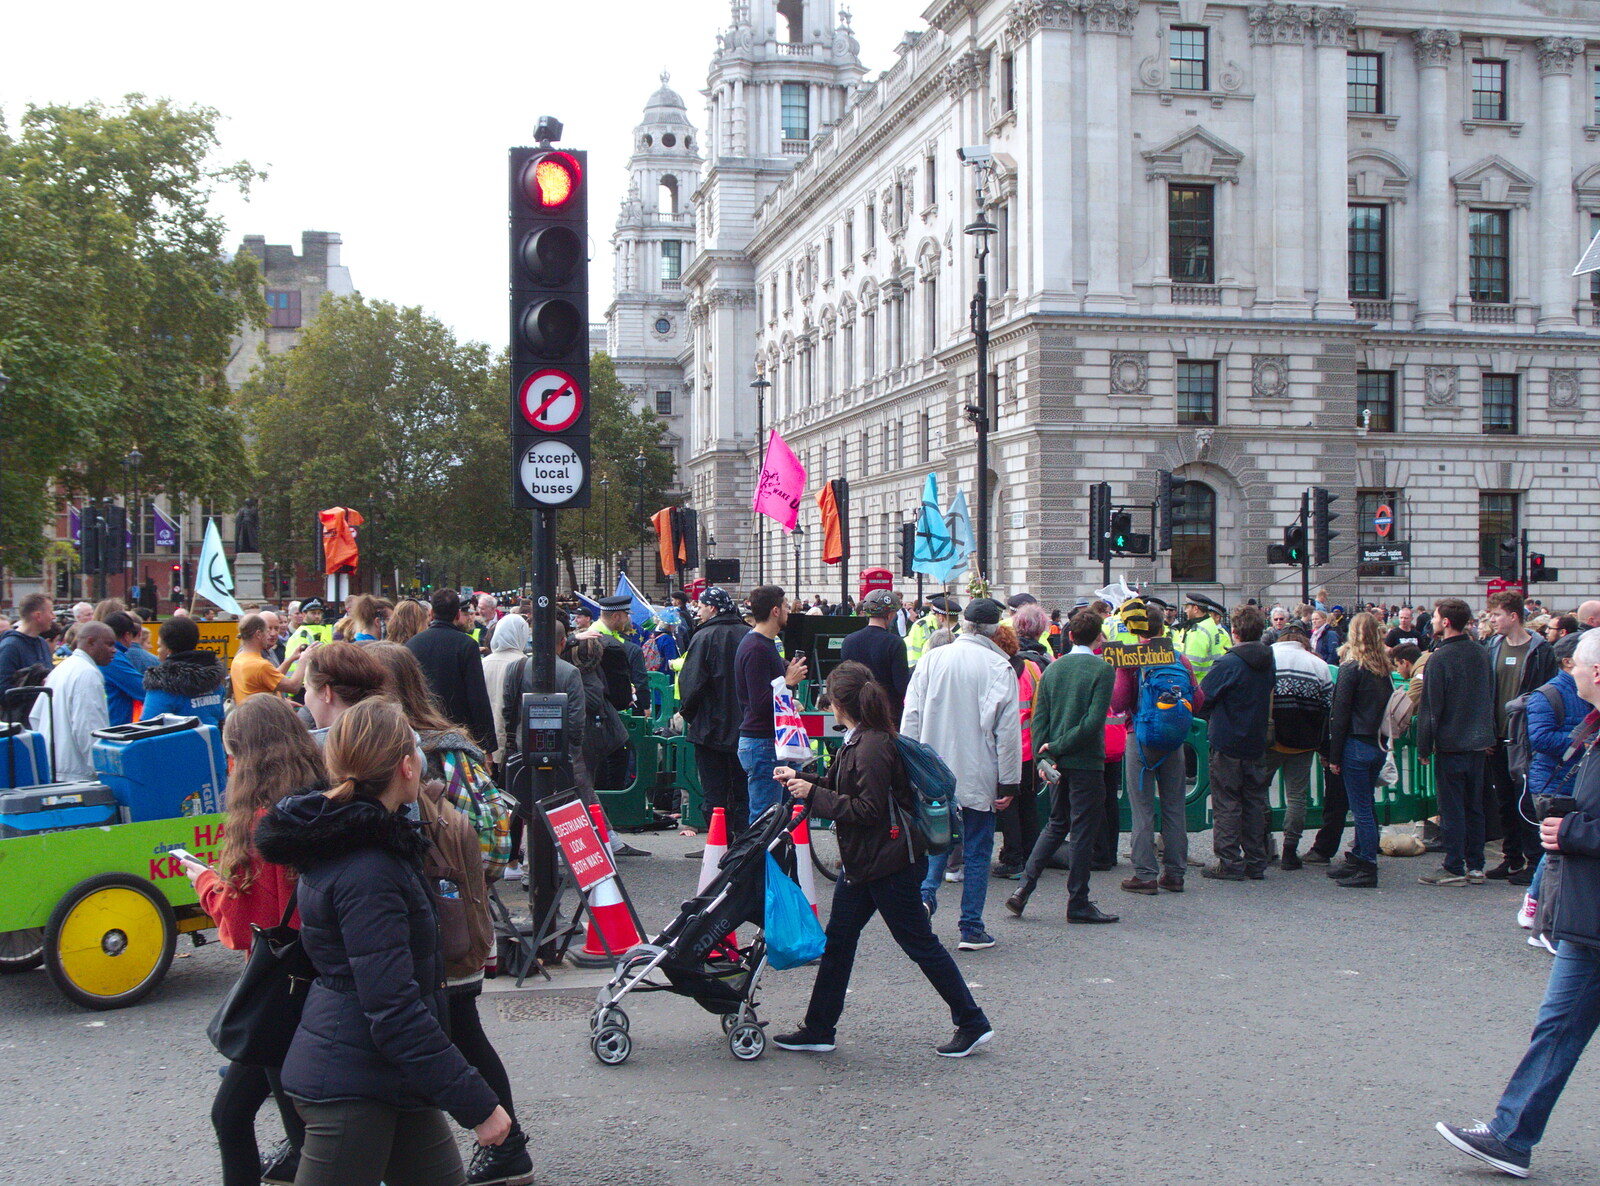 The scene in Parliament Square from The Extinction Rebellion Protest, Westminster, London - 9th October 2019